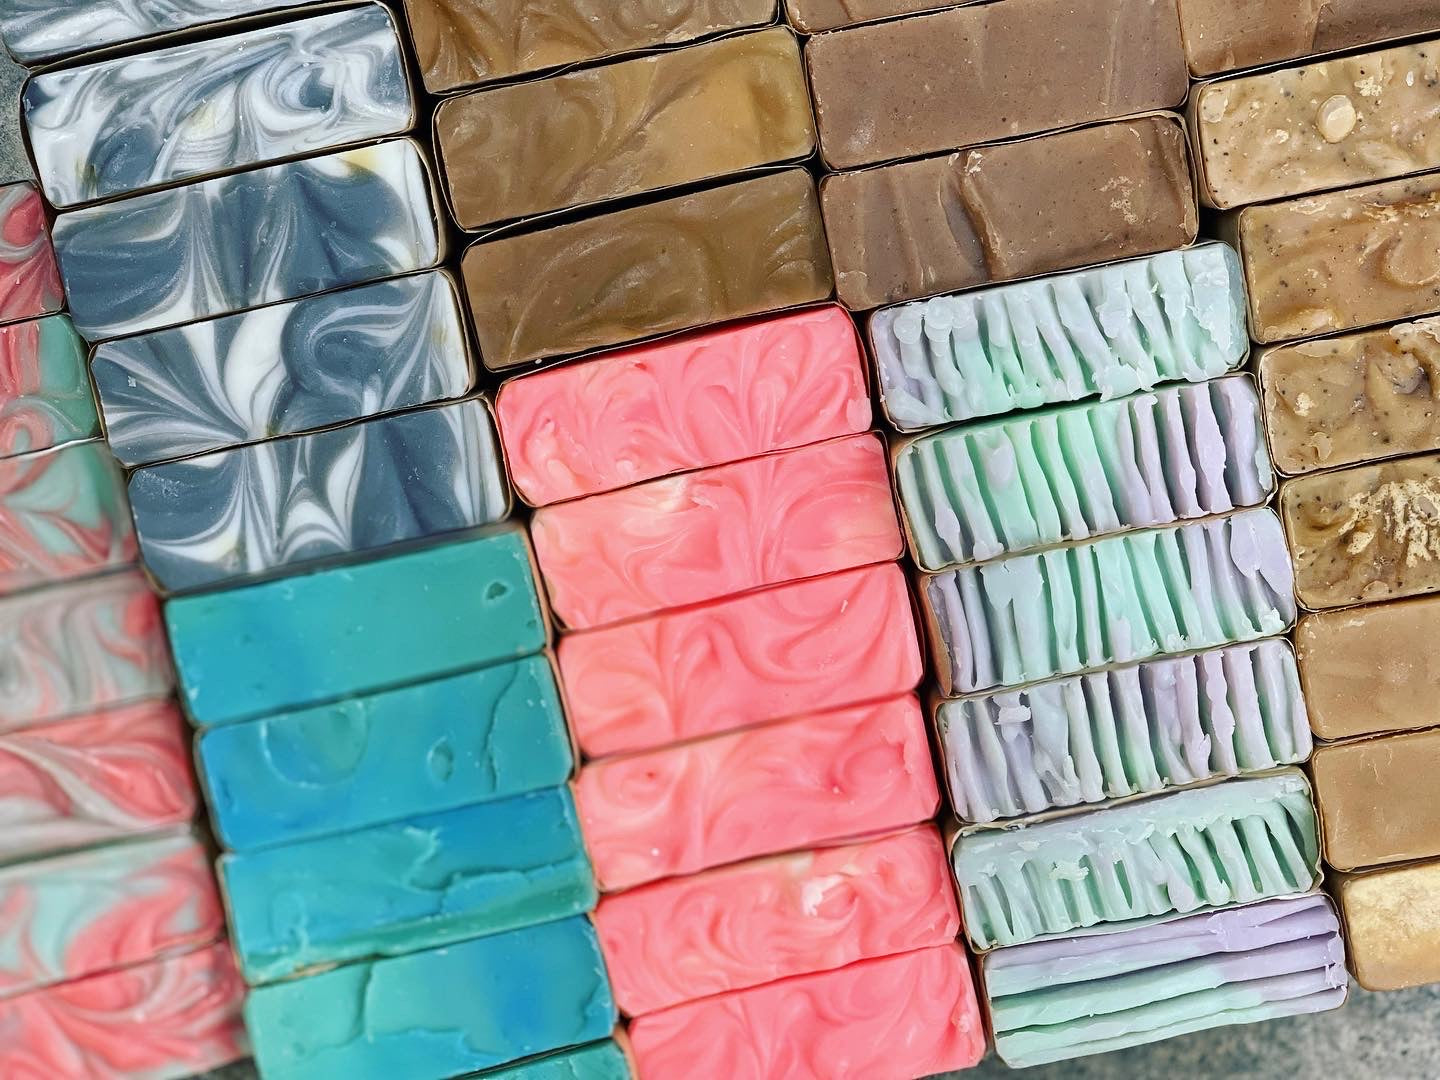 Hand poured bars of soap by Second Street Soap choose your scent